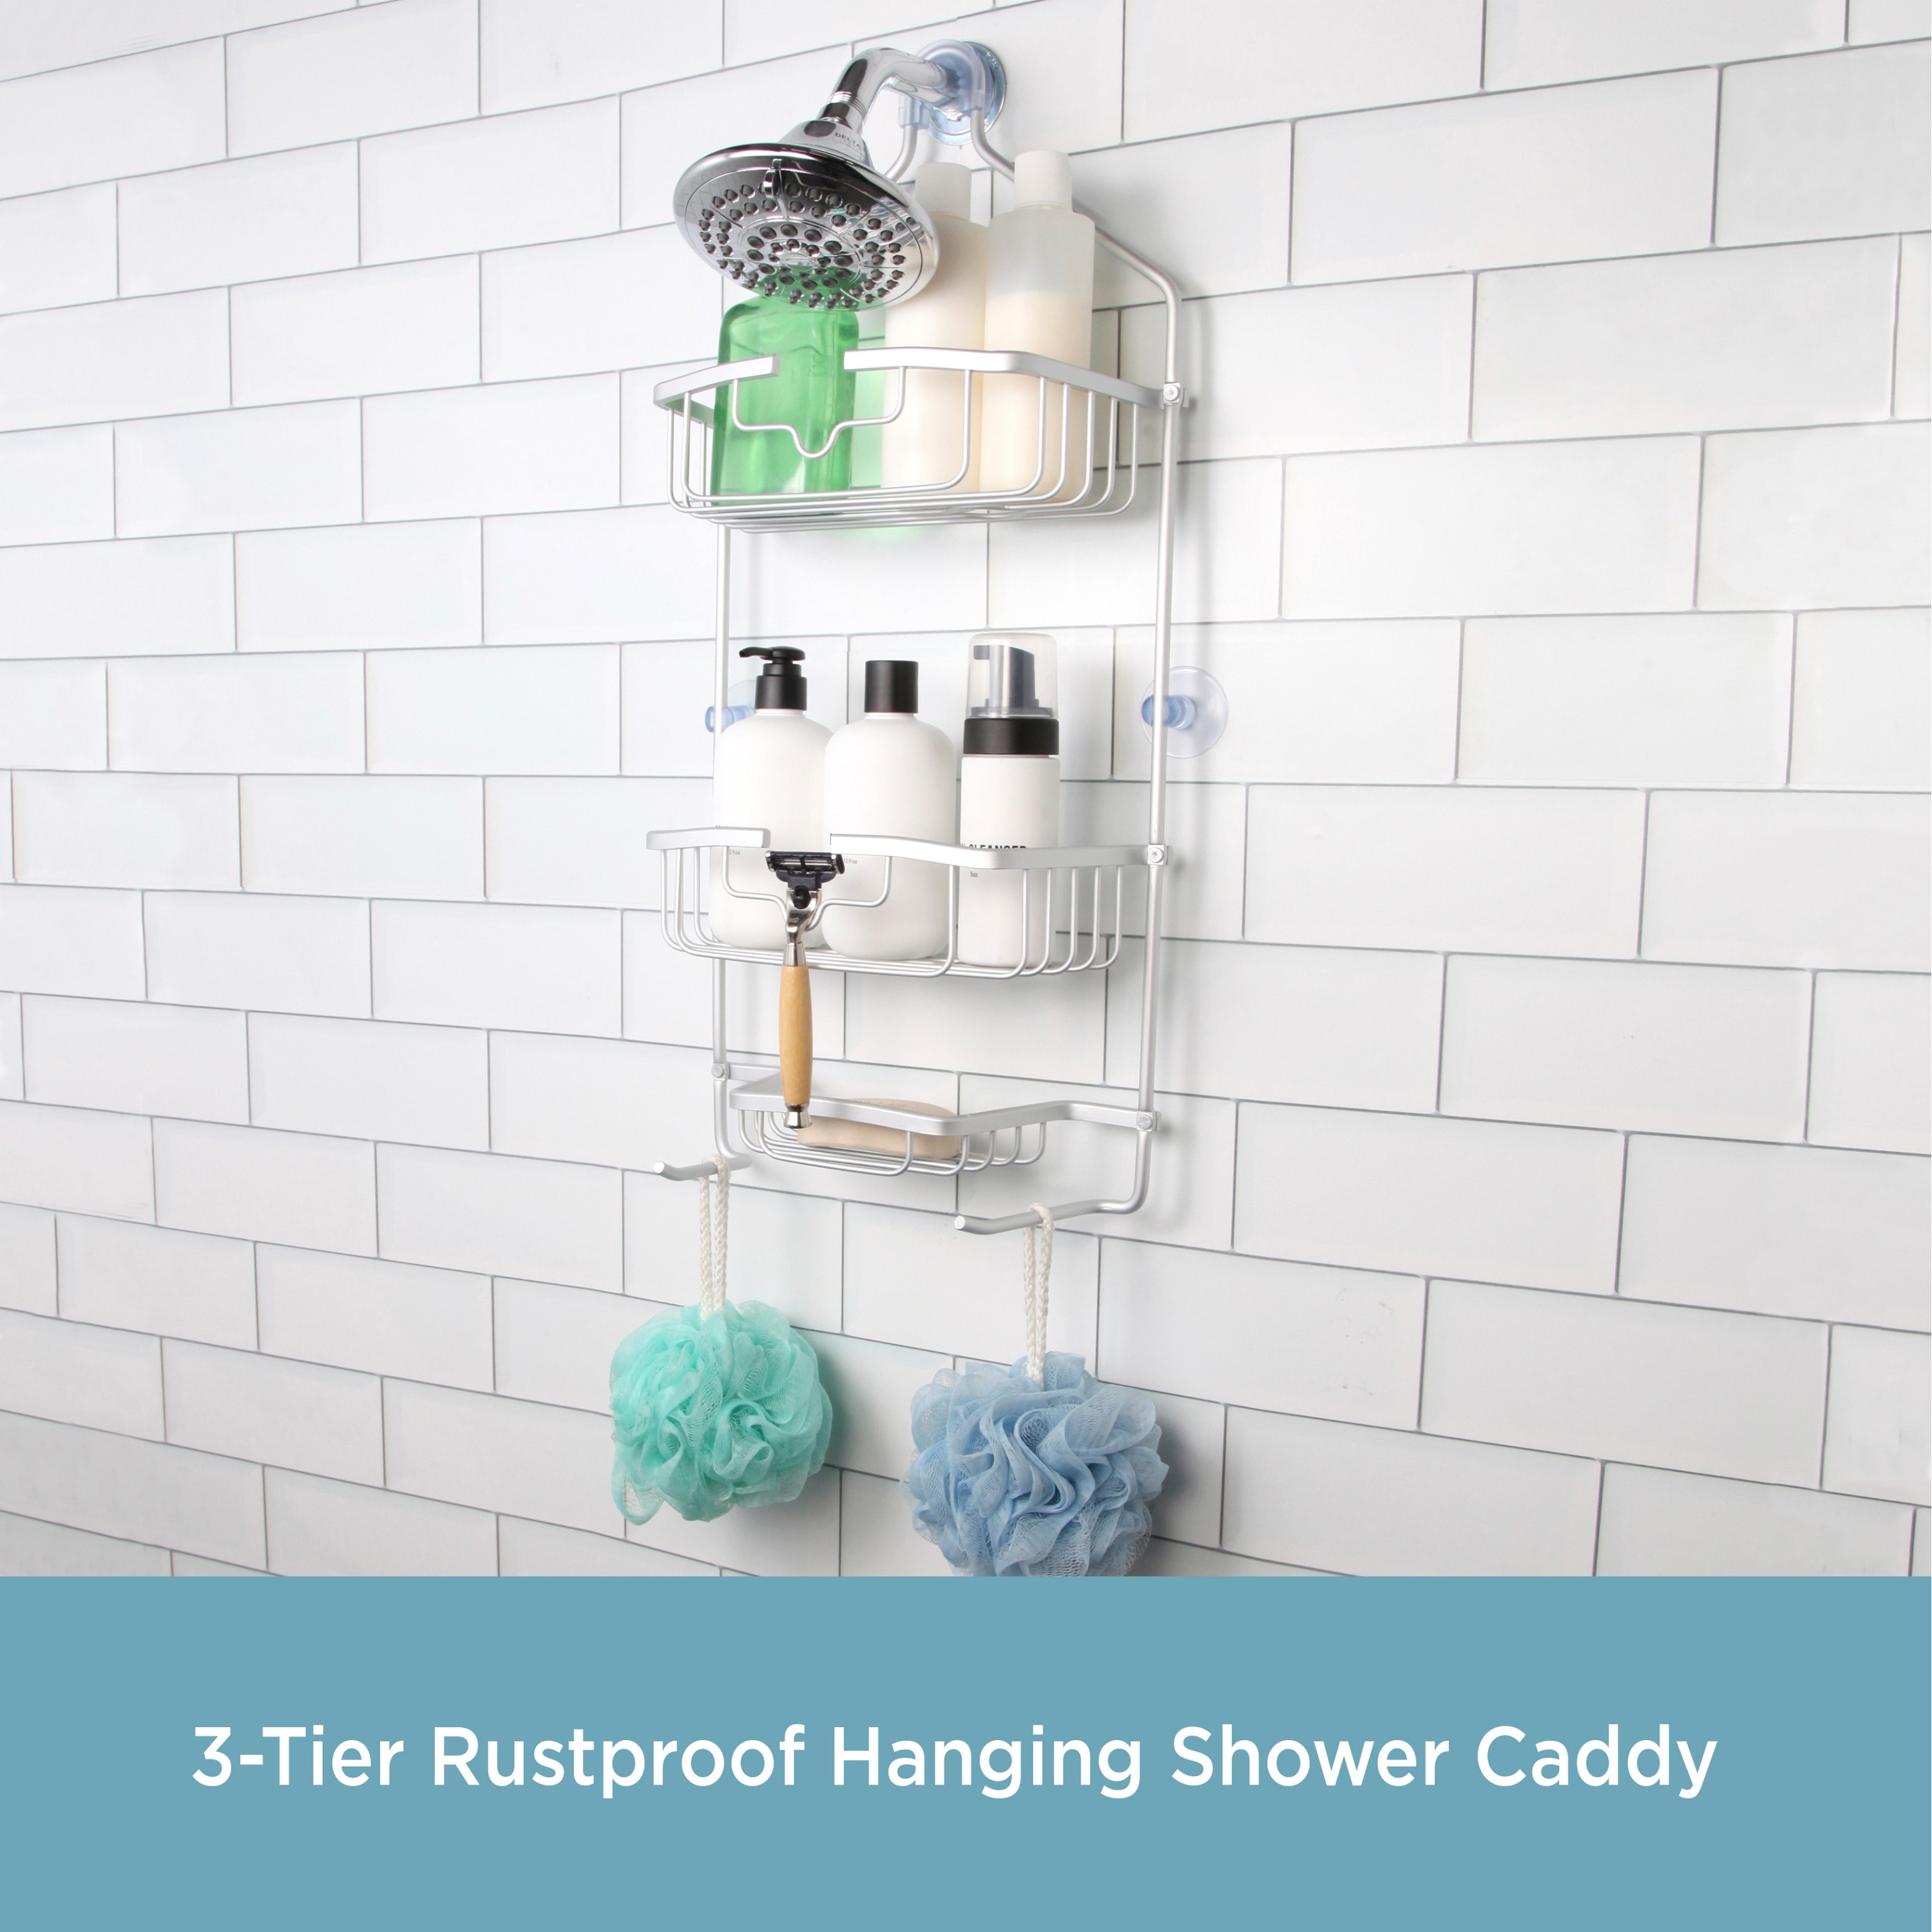 https://ak1.ostkcdn.com/images/products/is/images/direct/6e9b05dbe5fcabe5f6138bf35279e9566d39961e/Rust-Proof-Heavy-Duty-Aluminum-3-Tier-Hanging-Shower-Caddy-with-Suction-Cups-and-Two-Razor-Holders.jpg